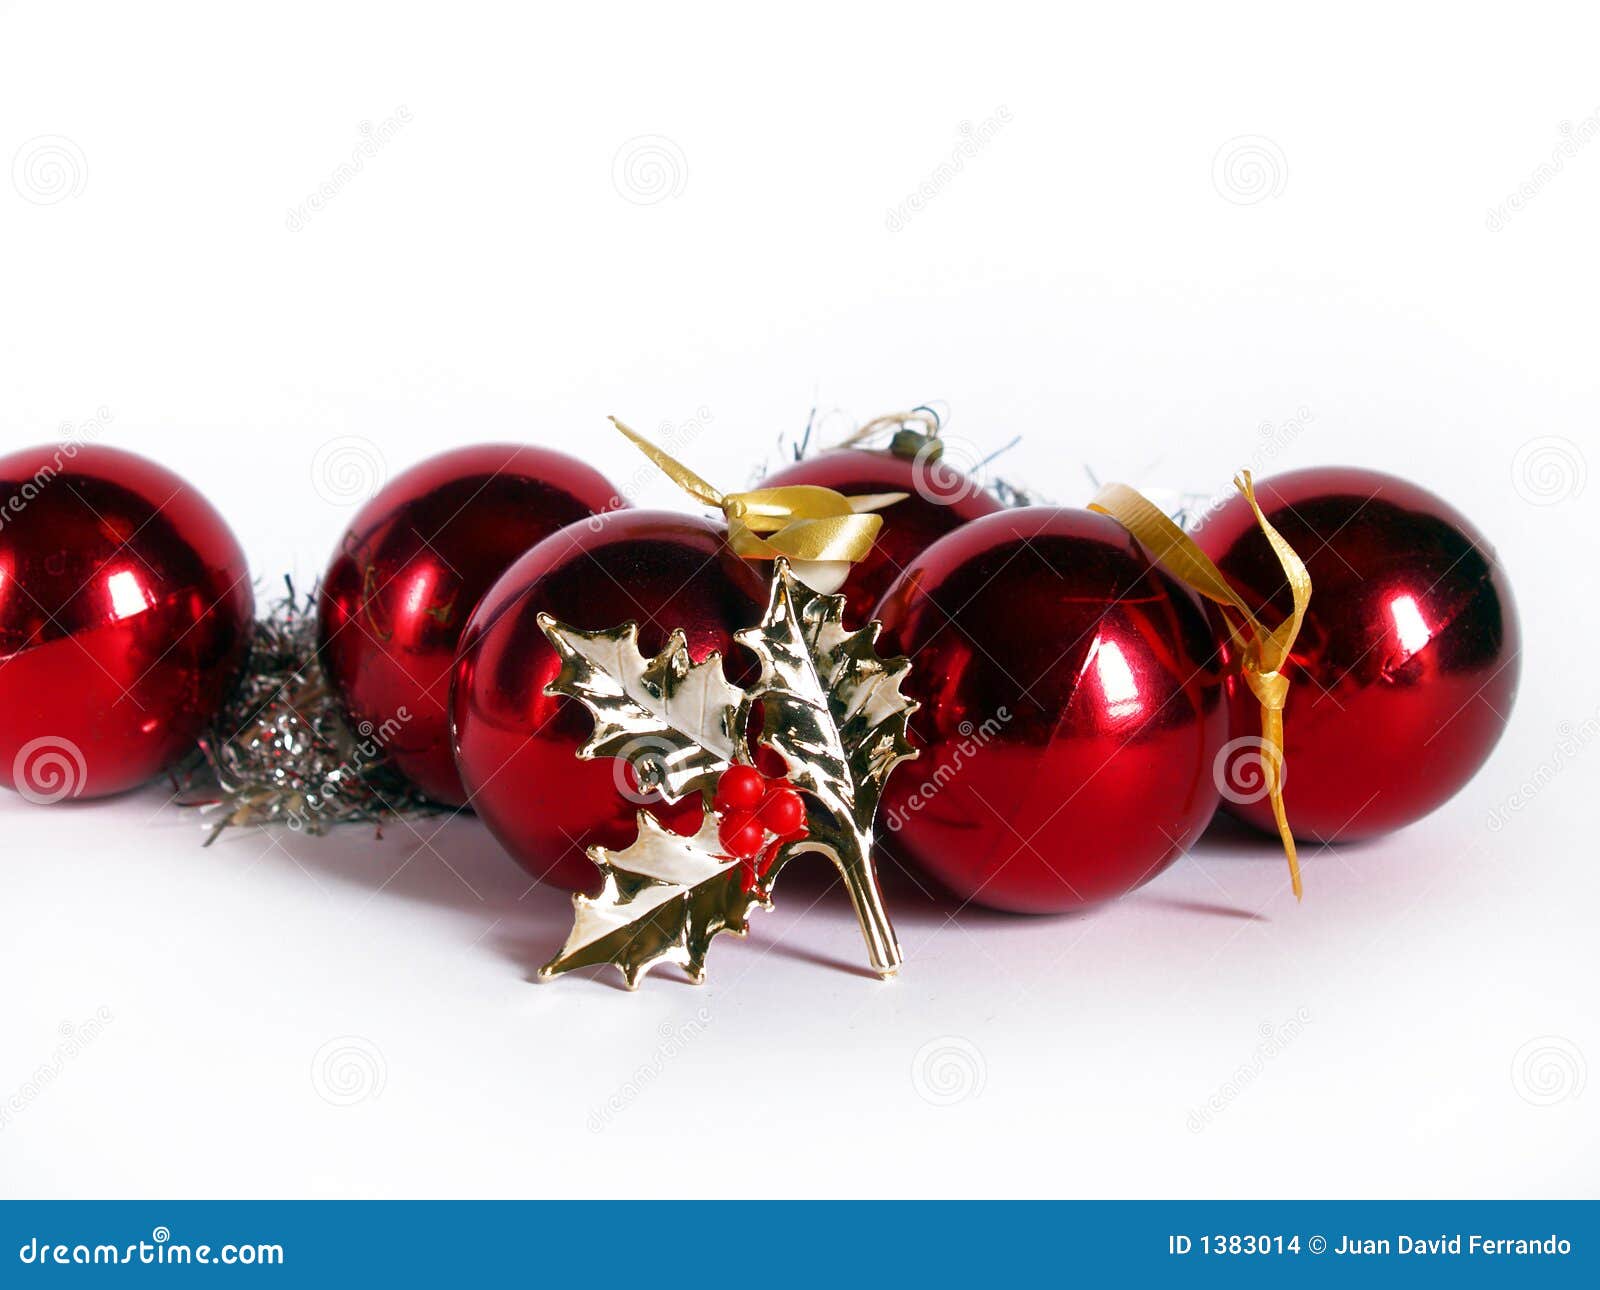 Red christmas balls stock photo. Image of happiness, leaf - 1383014